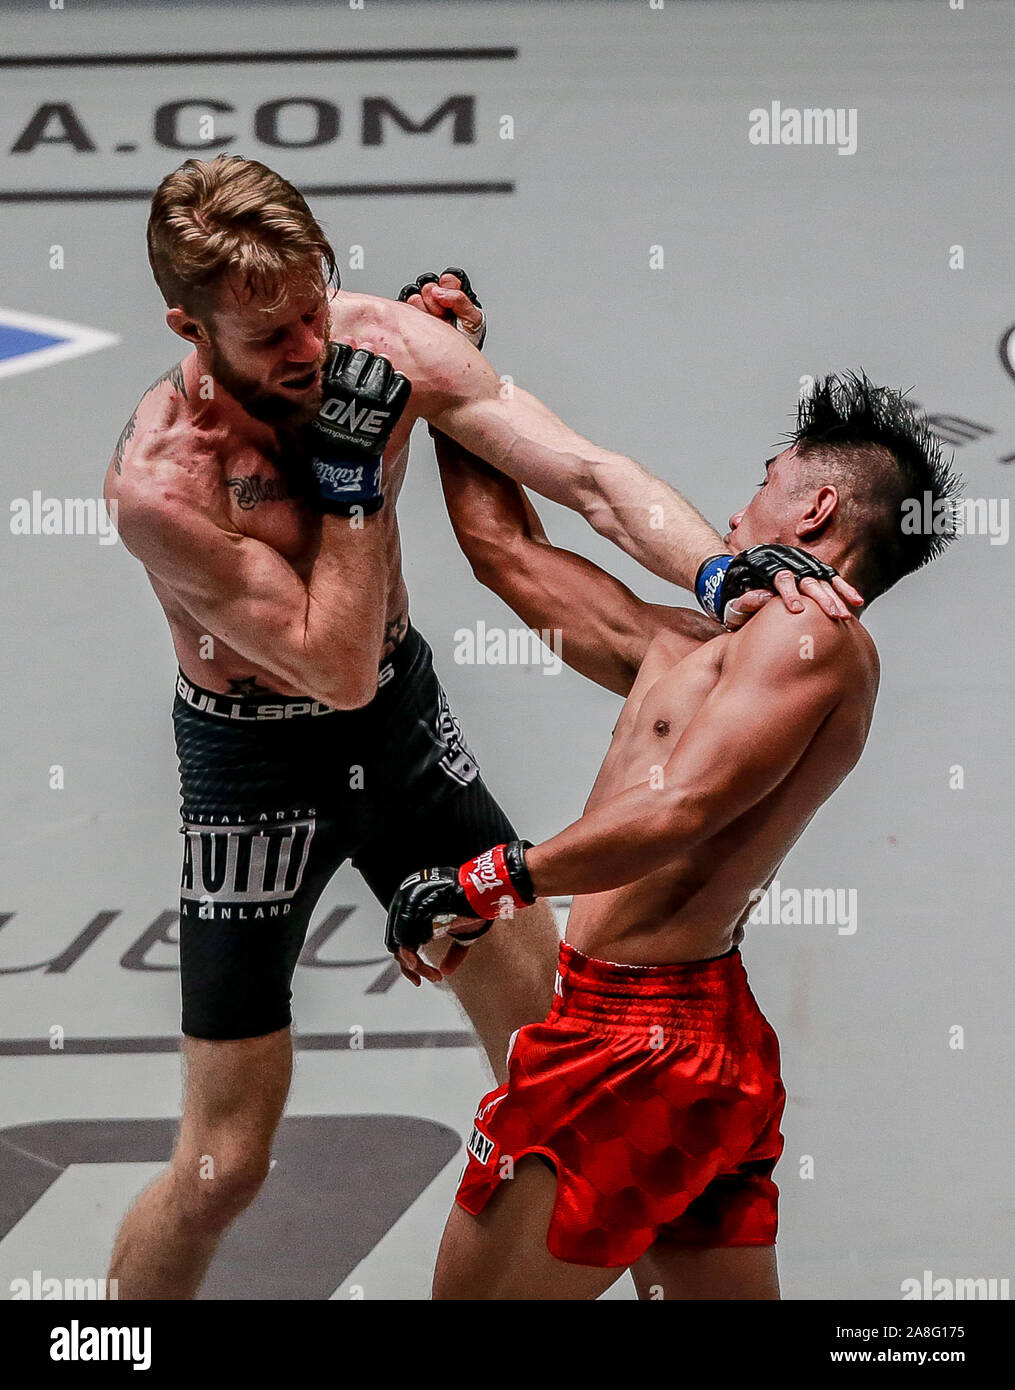 Pasay City, Philippines. 8th Nov, 2019. Geje Eustaquio of the Philippines  (R) competes against Toni Tauru of Finland during their flyweight fight at  the ONE Championship tournament in Pasay City, the Philippines,